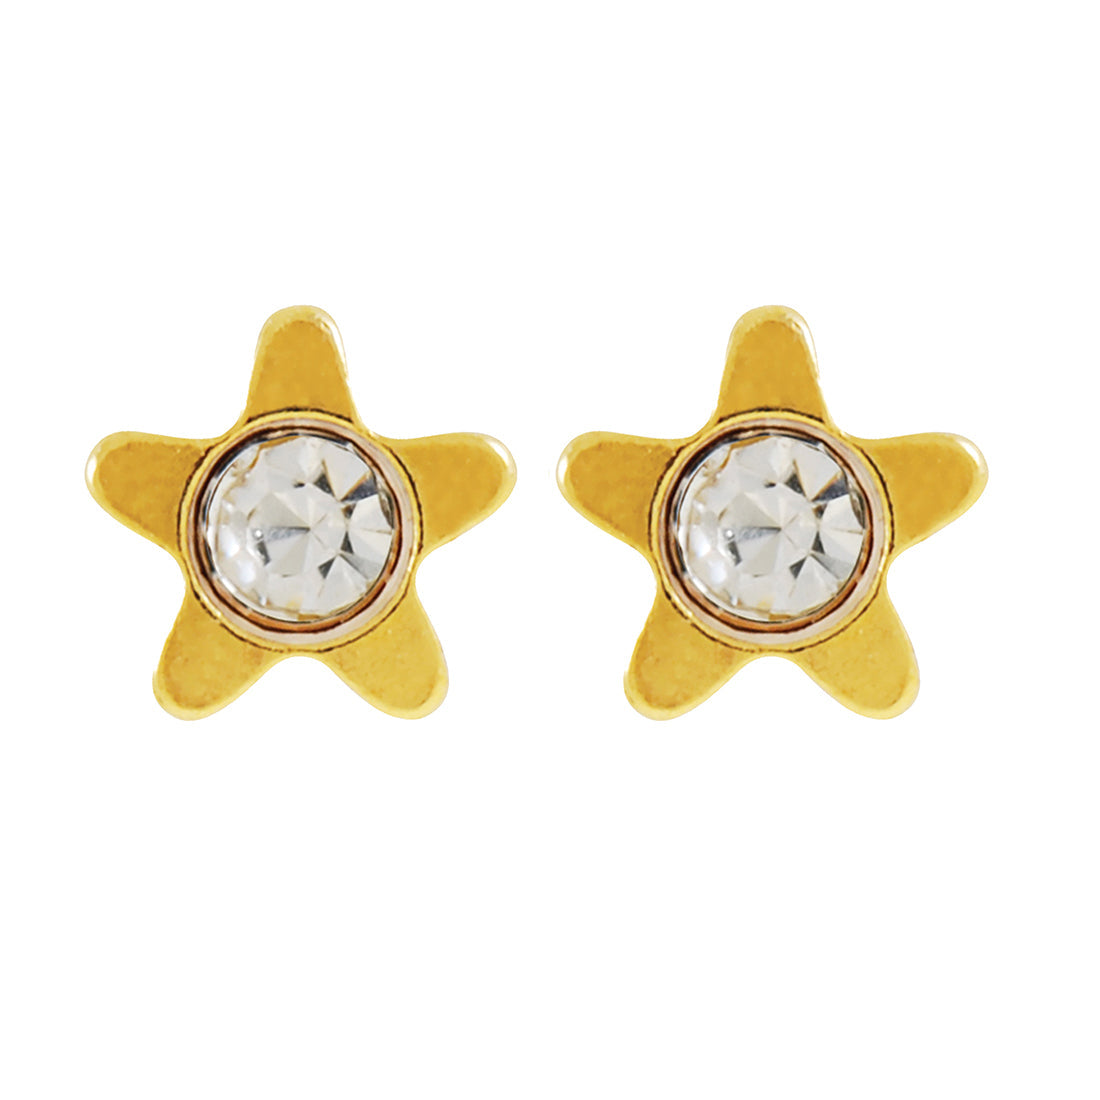 4MM Starlite April Crystal 24K Pure Gold Plated Piercing Ear Stud